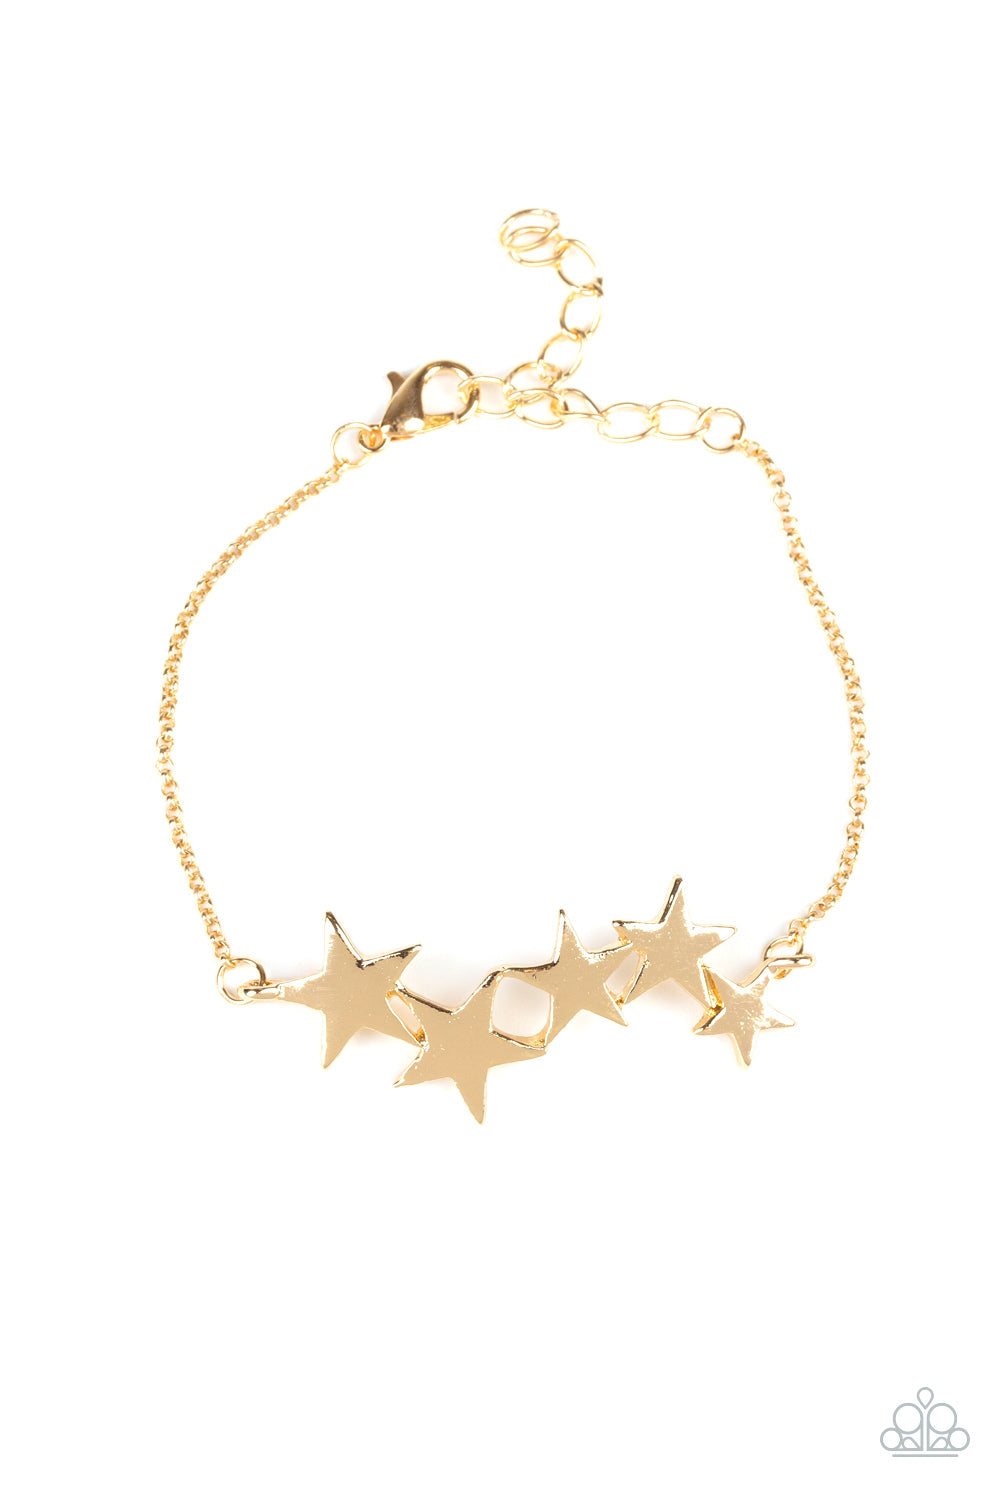 all-star-shimmer-gold-p9wh-gdxx-094xx